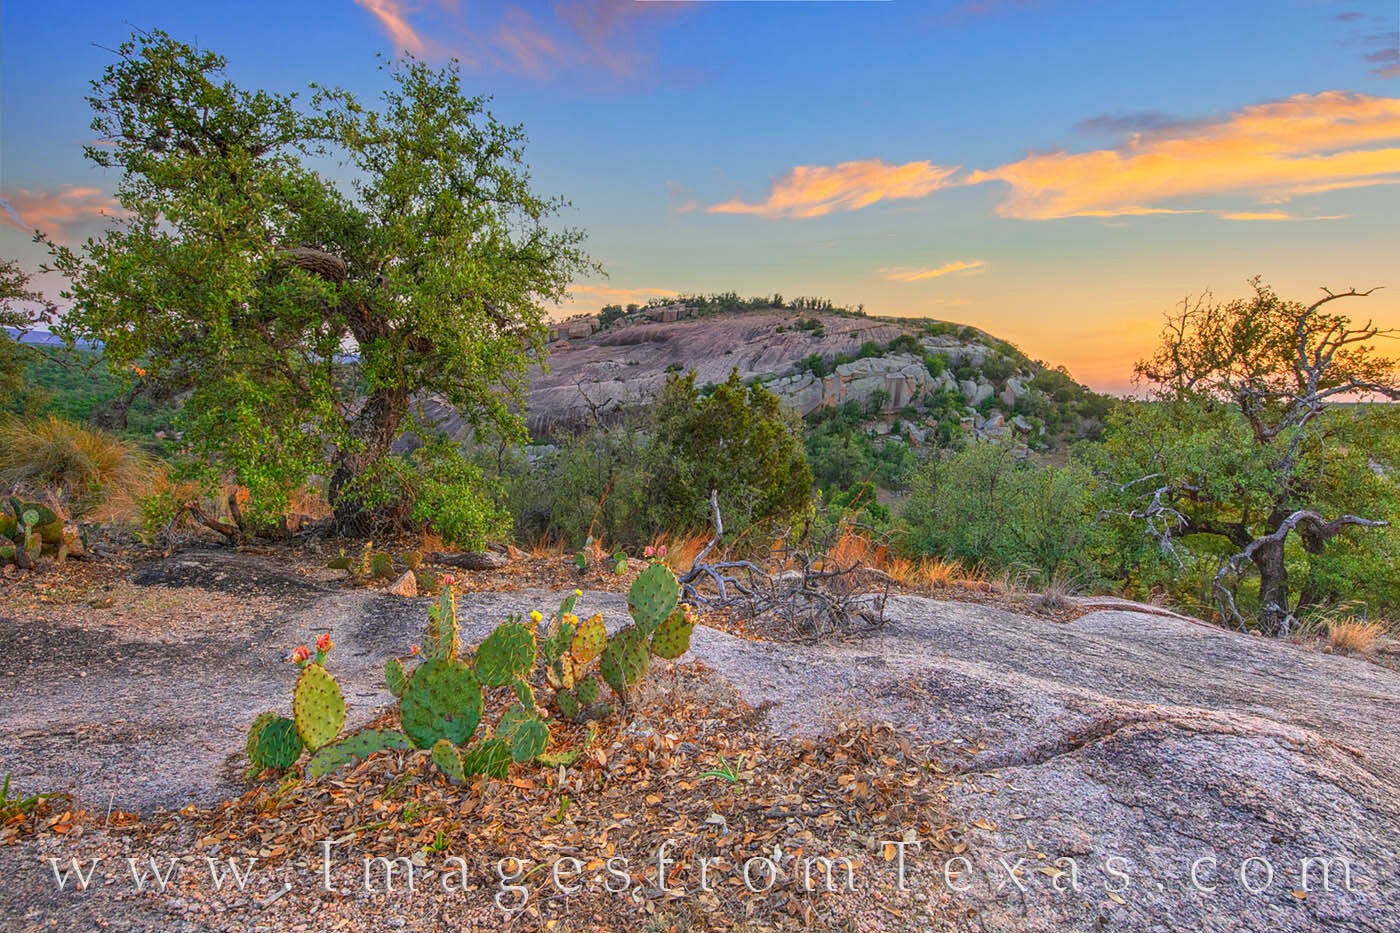 Prickly Pear cacti blooms on Buzzard's Roost, a small granite uplift in Enchanted Rock State Natural Area.